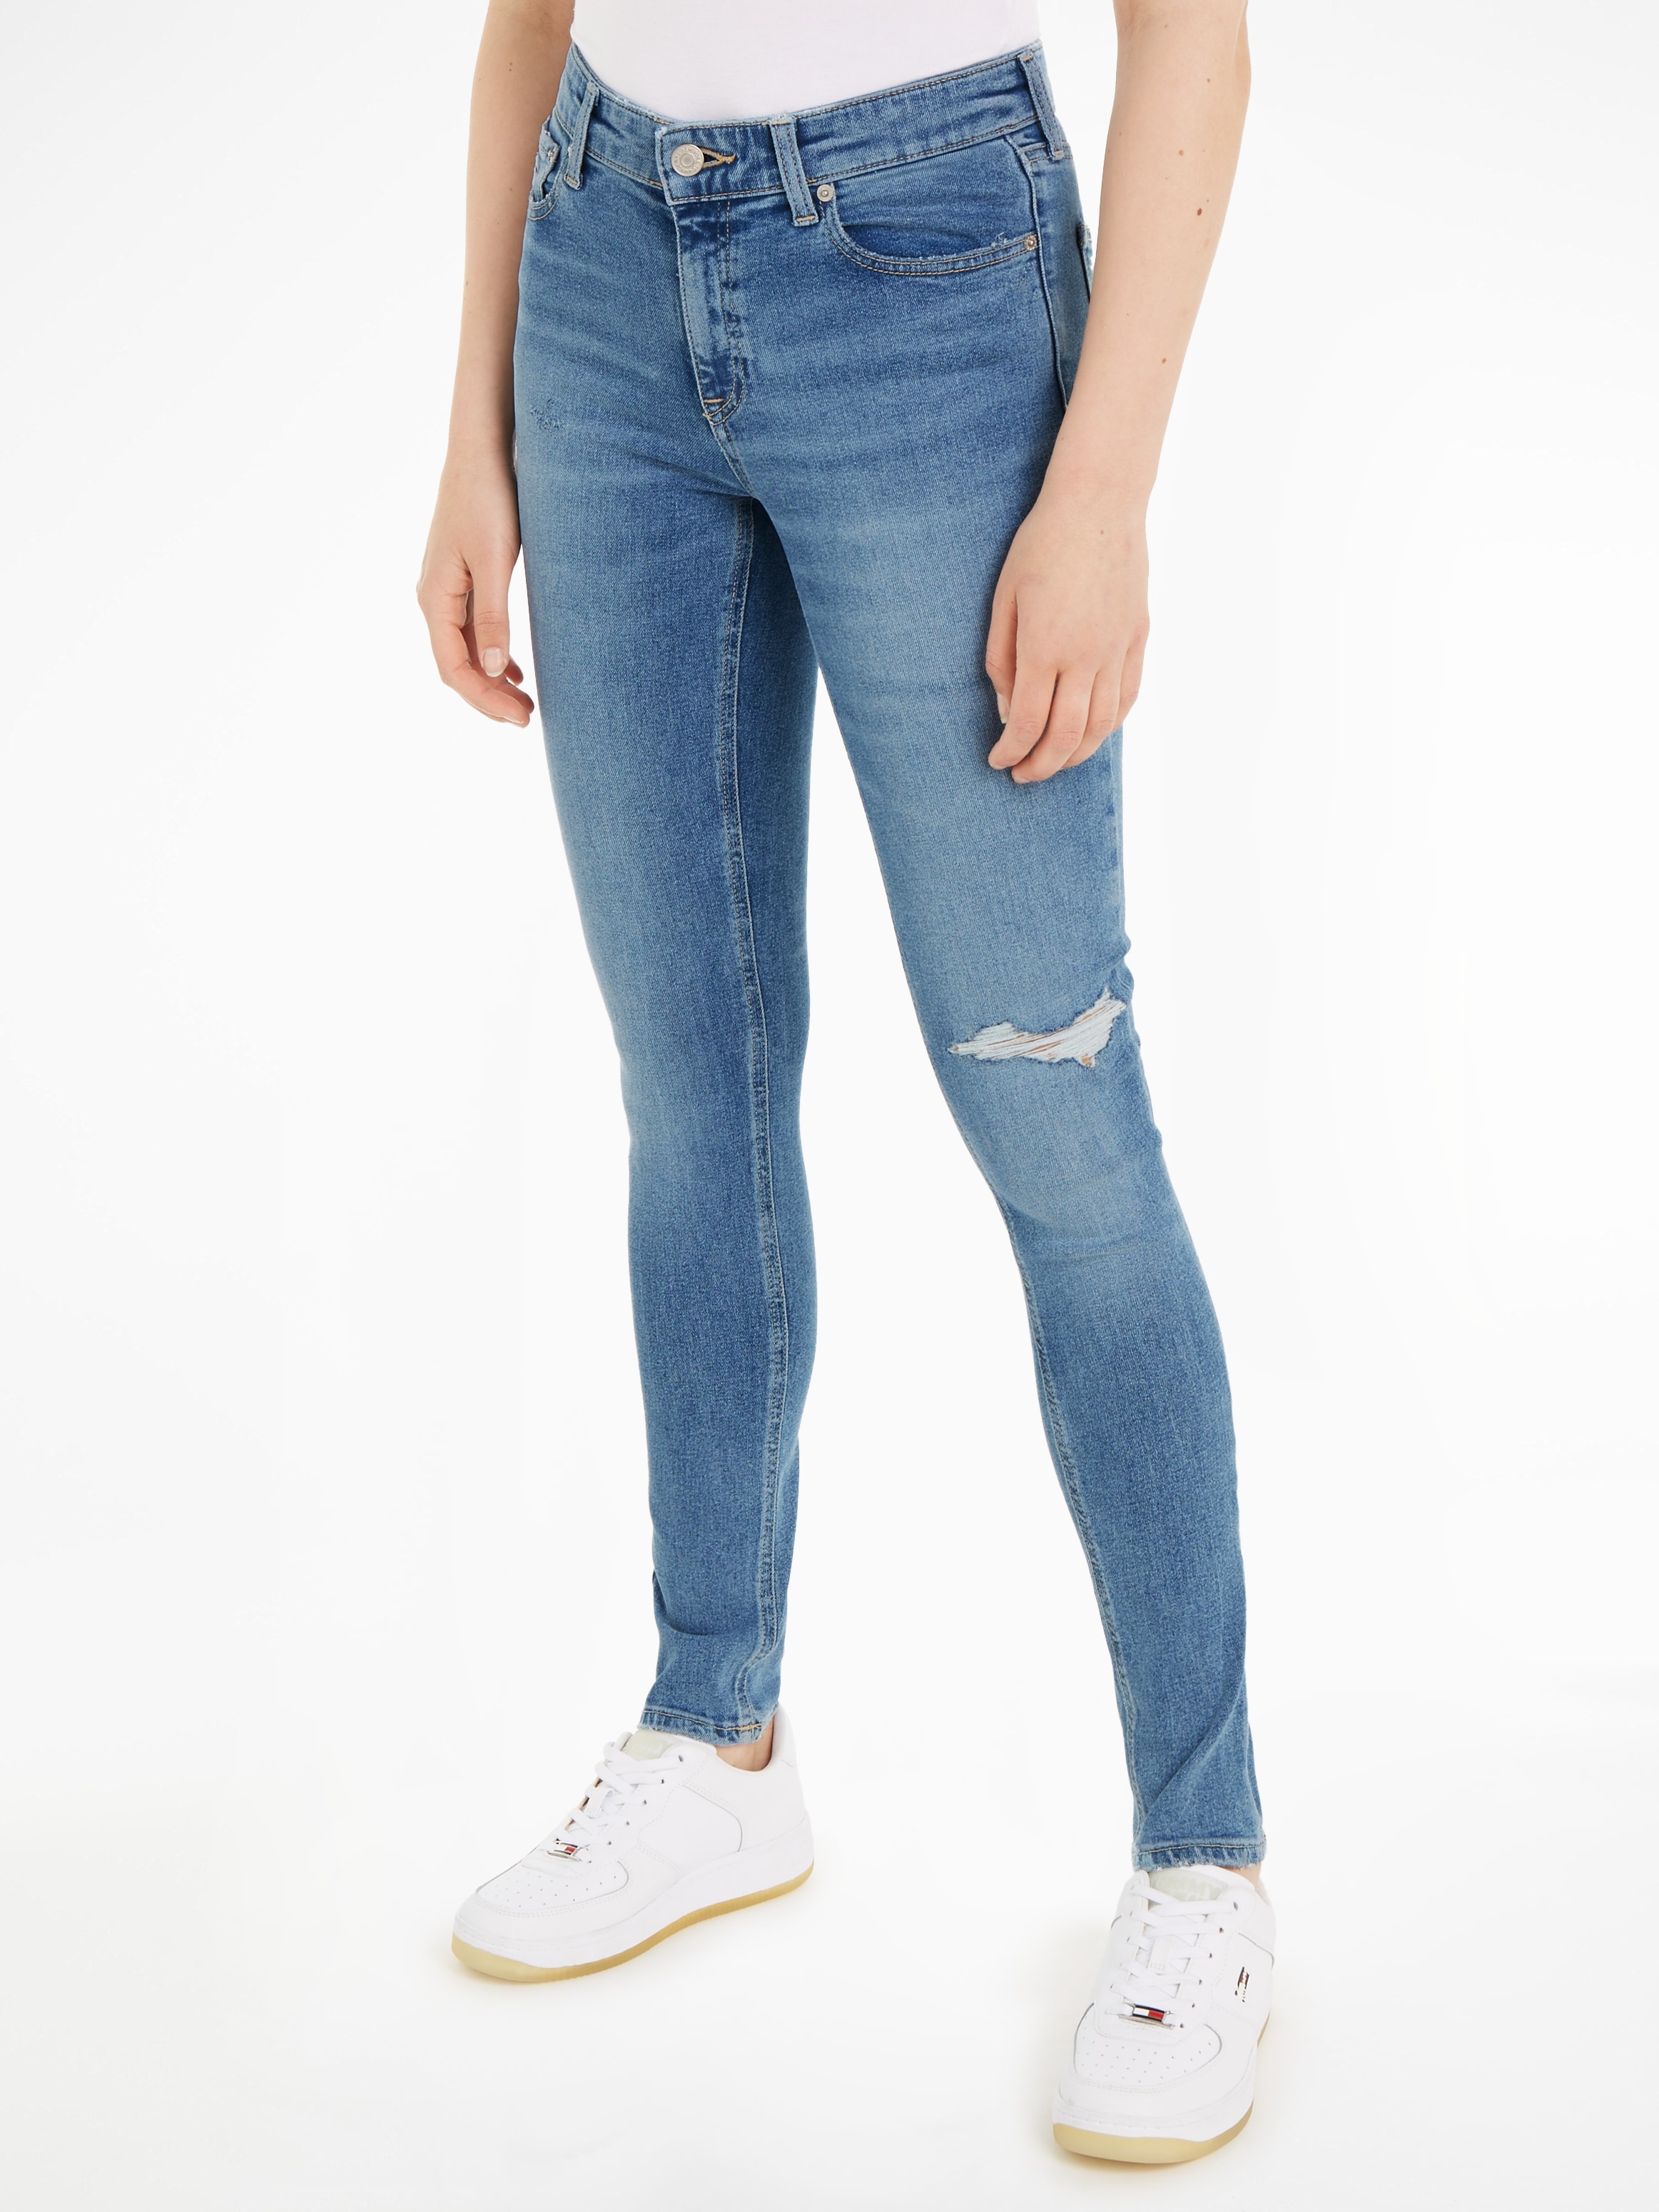 Tommy Jeans Skinny-fit-Jeans »Nora«, mit Tommy Jeans Markenlabel & Badge